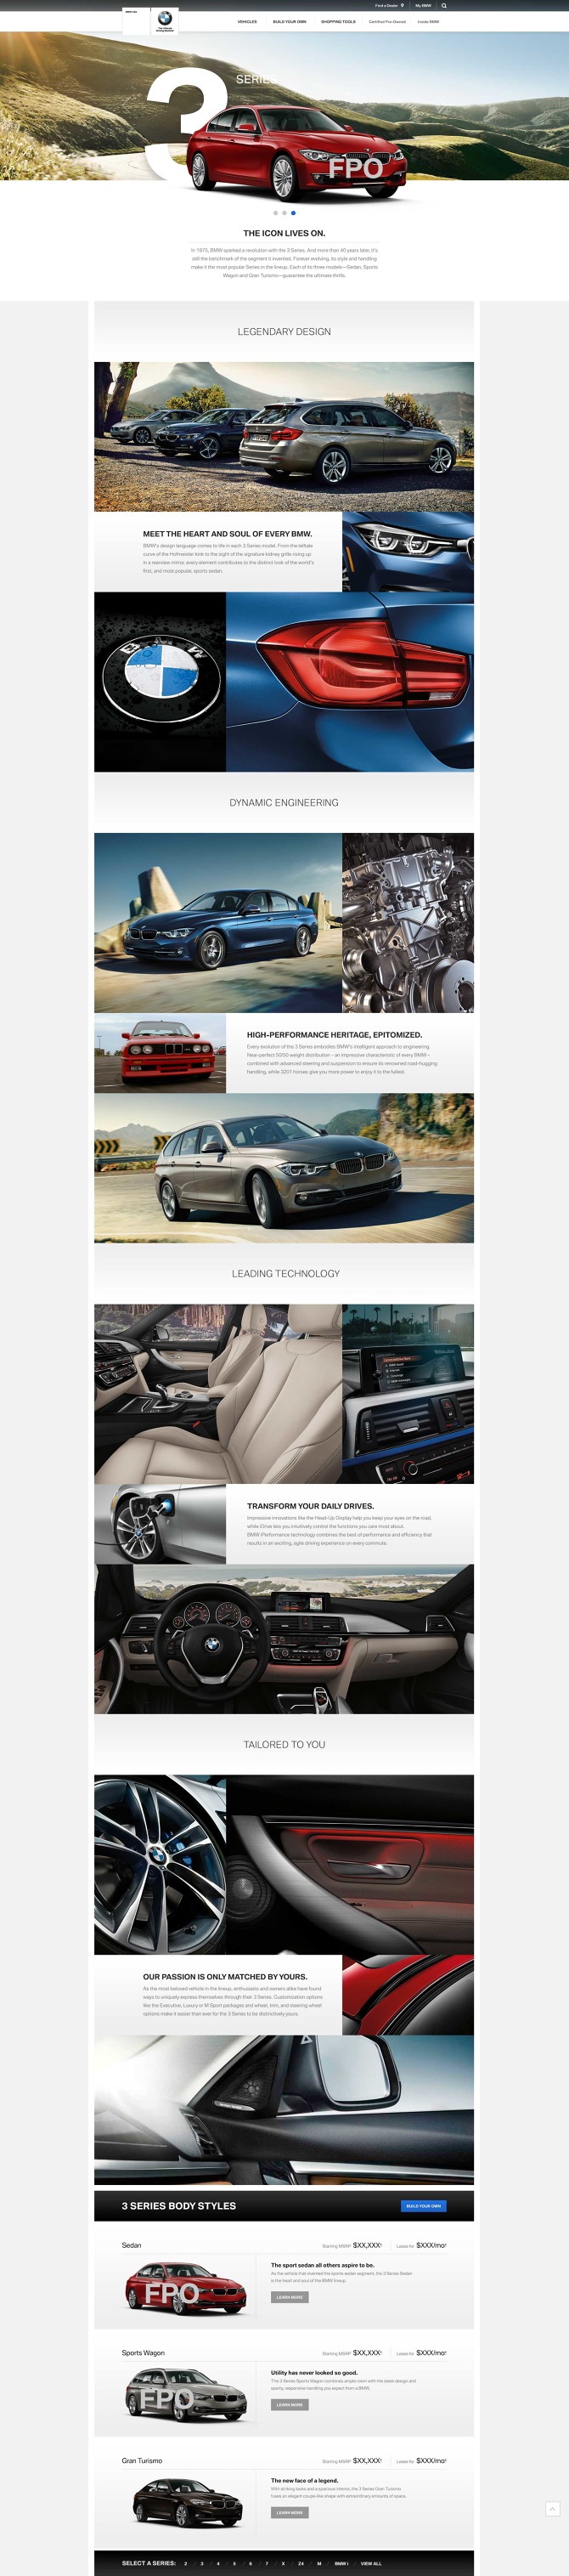 MY16_3Series_Overview_20150722_670.jpg